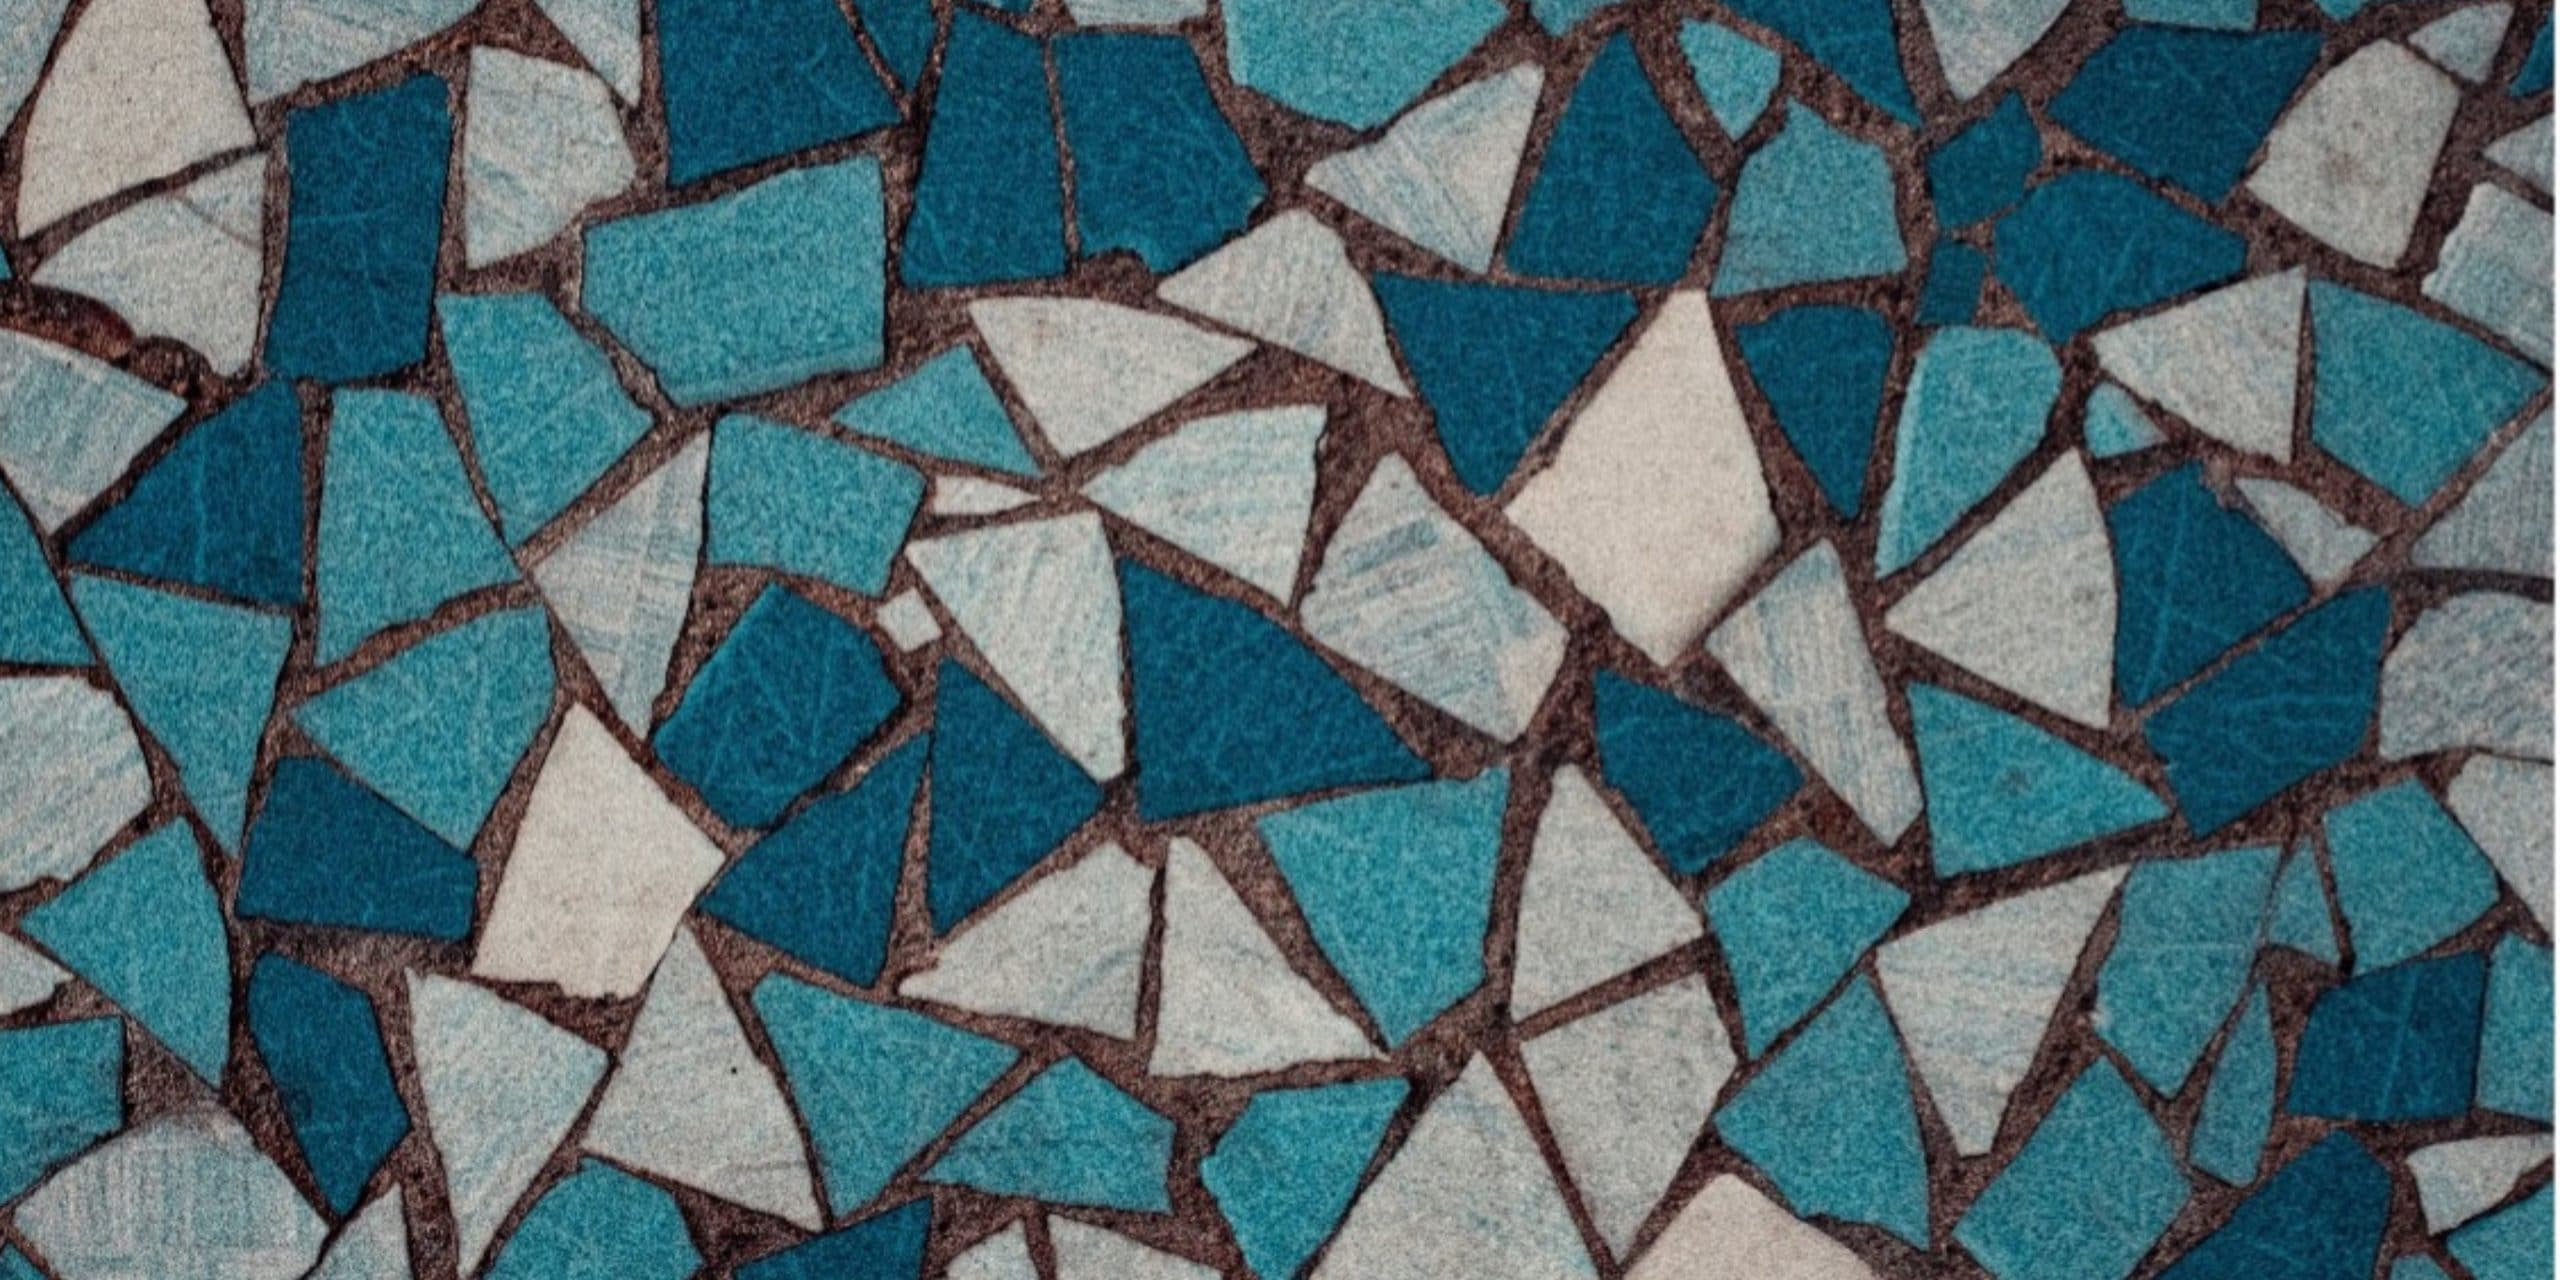 Mosaic flooring in different shades of blue